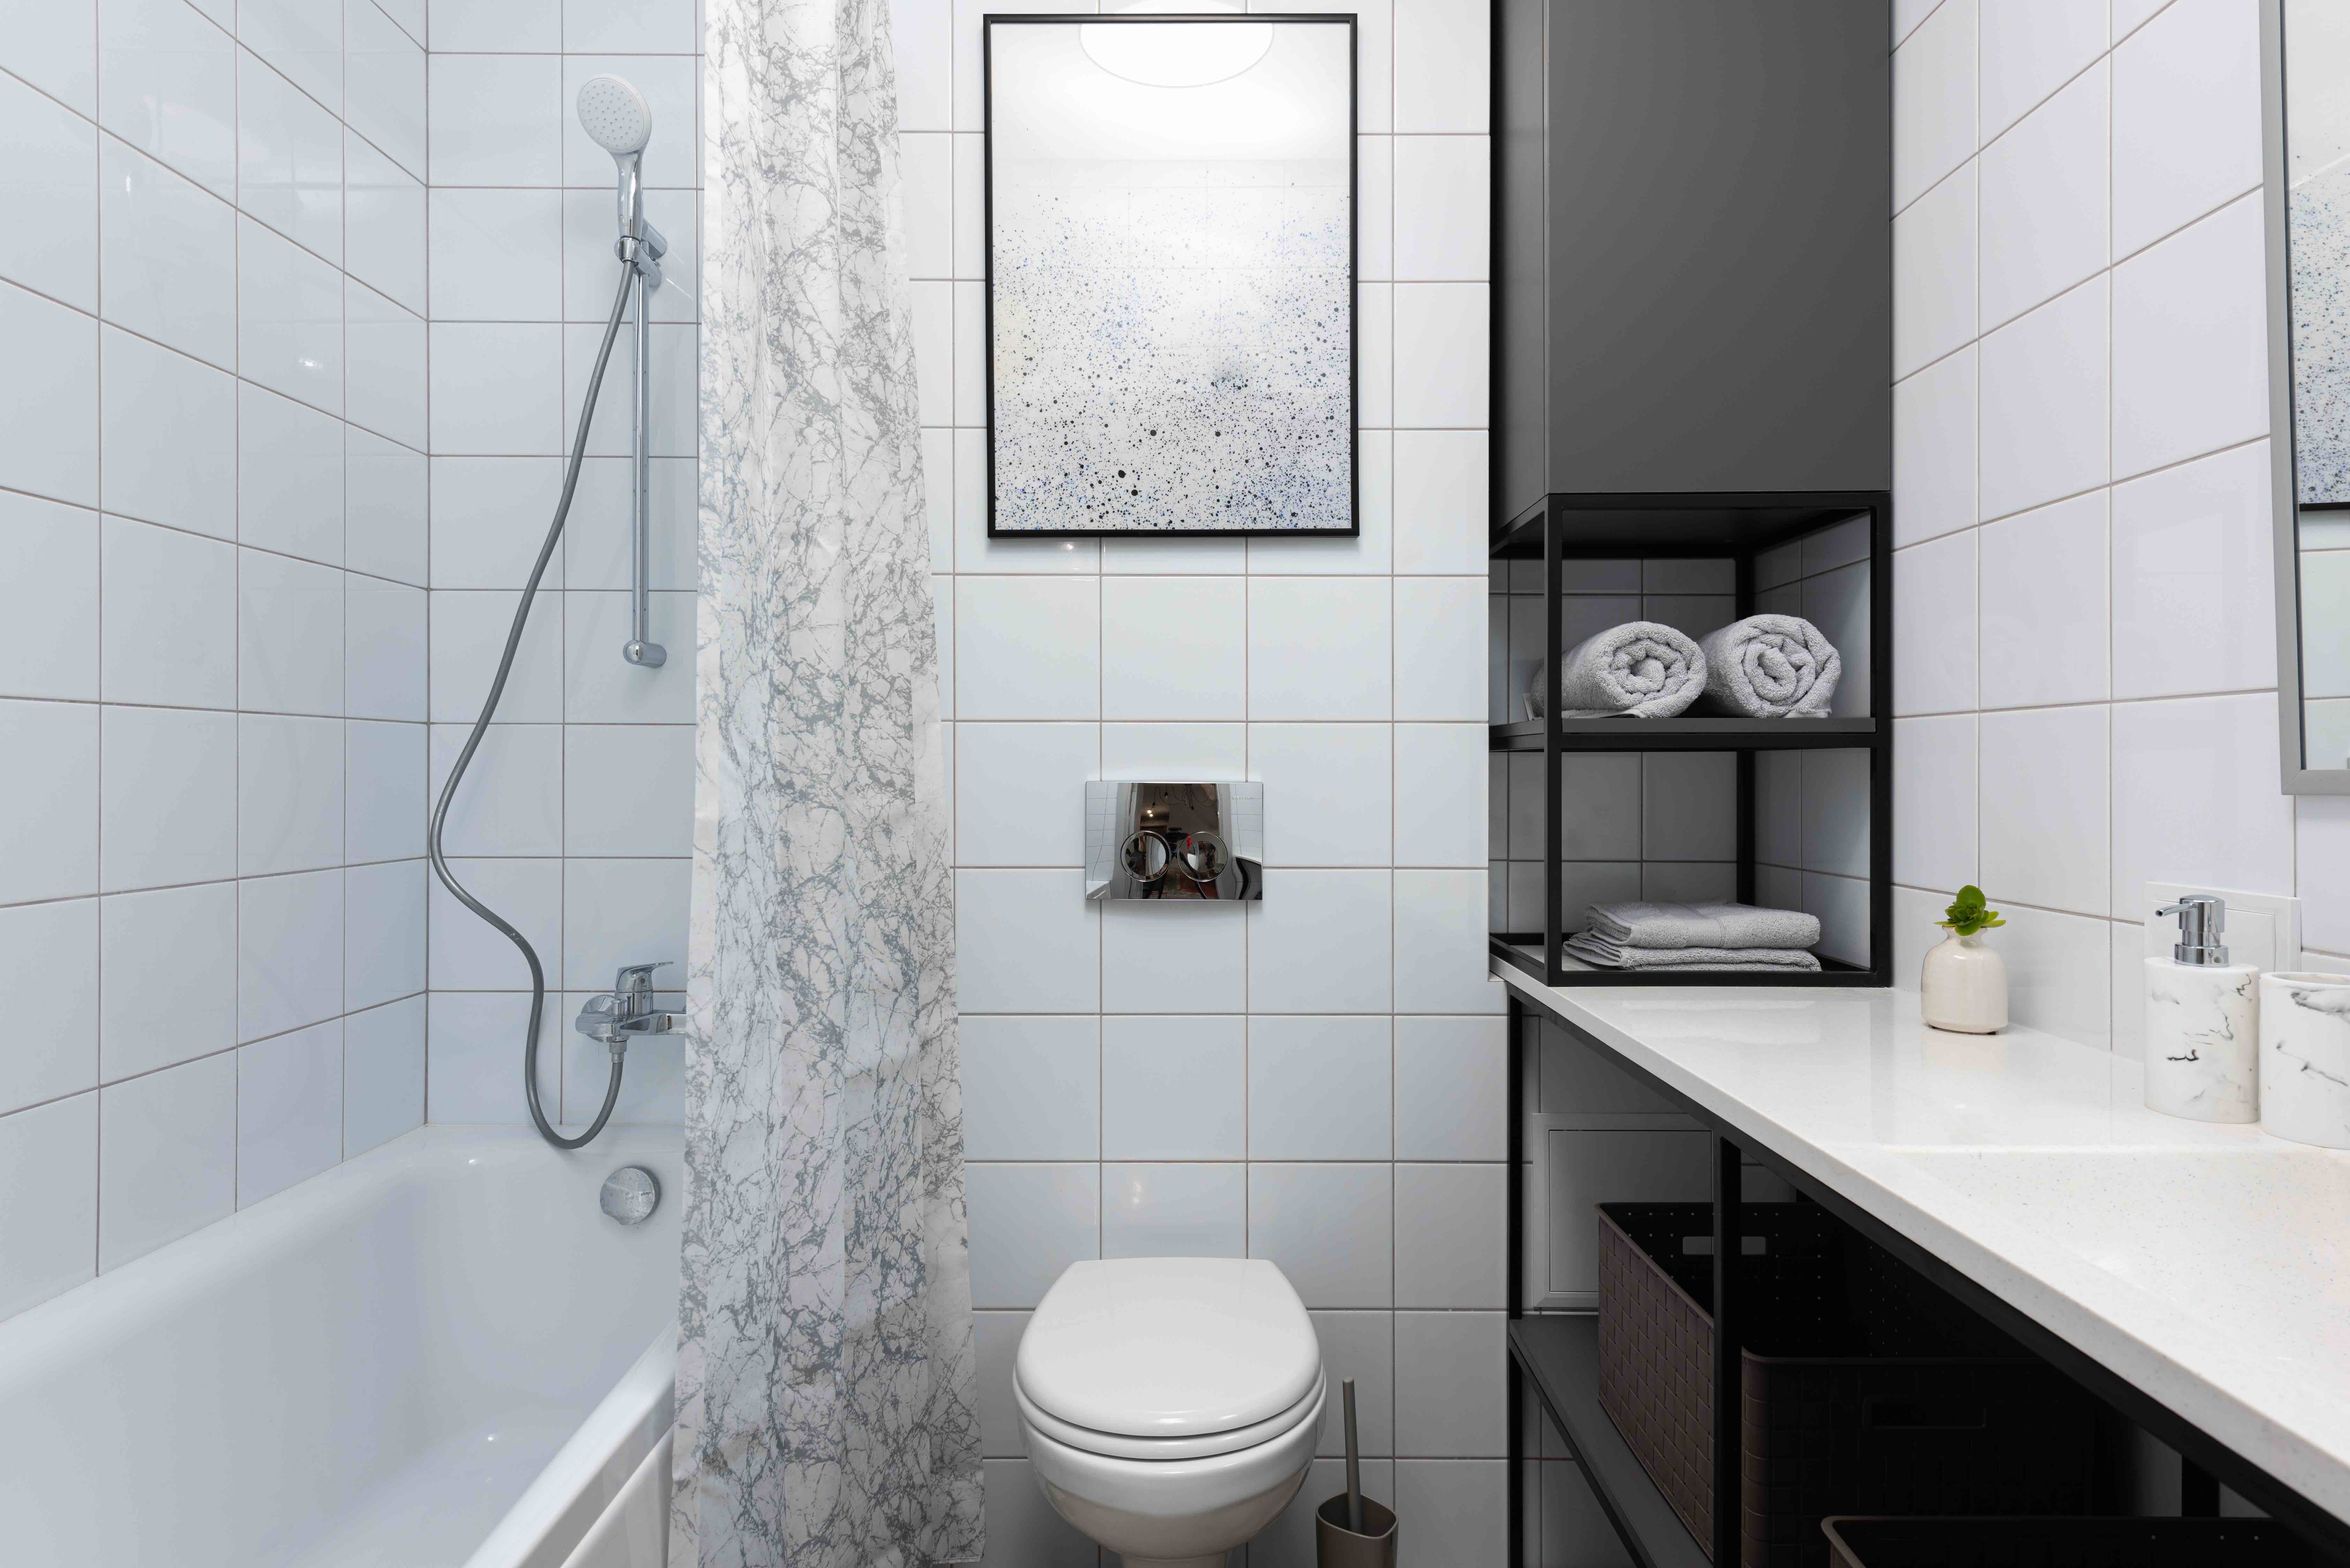 Condo Bathroom Remodel Ideas for Better Style and Functionality